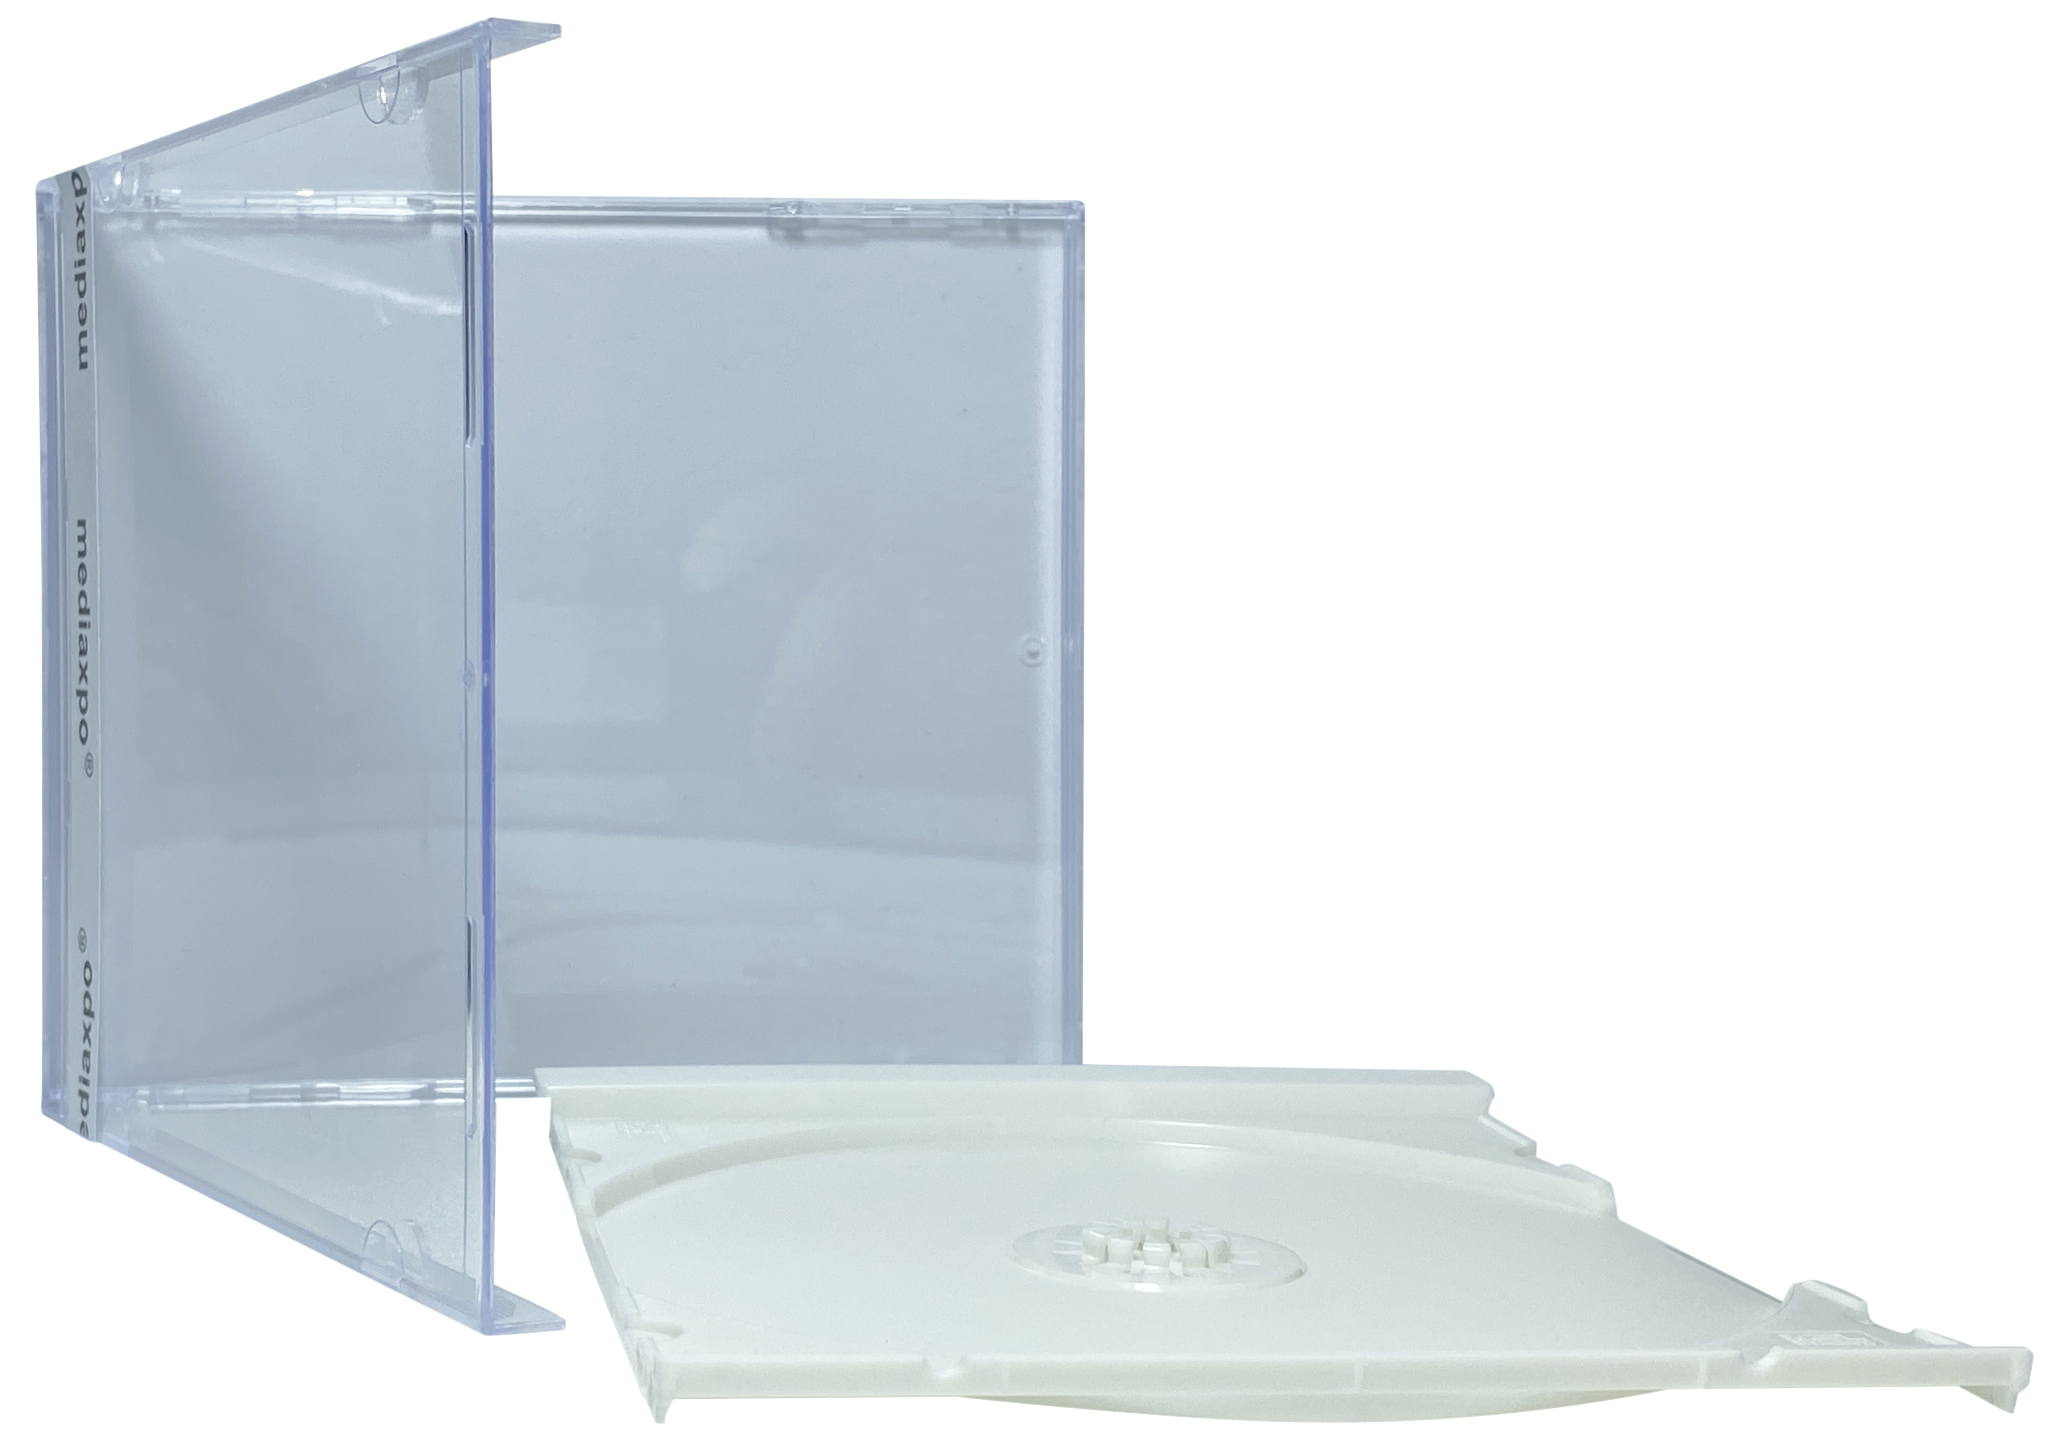 Image of ID 1214262417 400 STANDARD White Color CD Jewel Case (Unassembled)